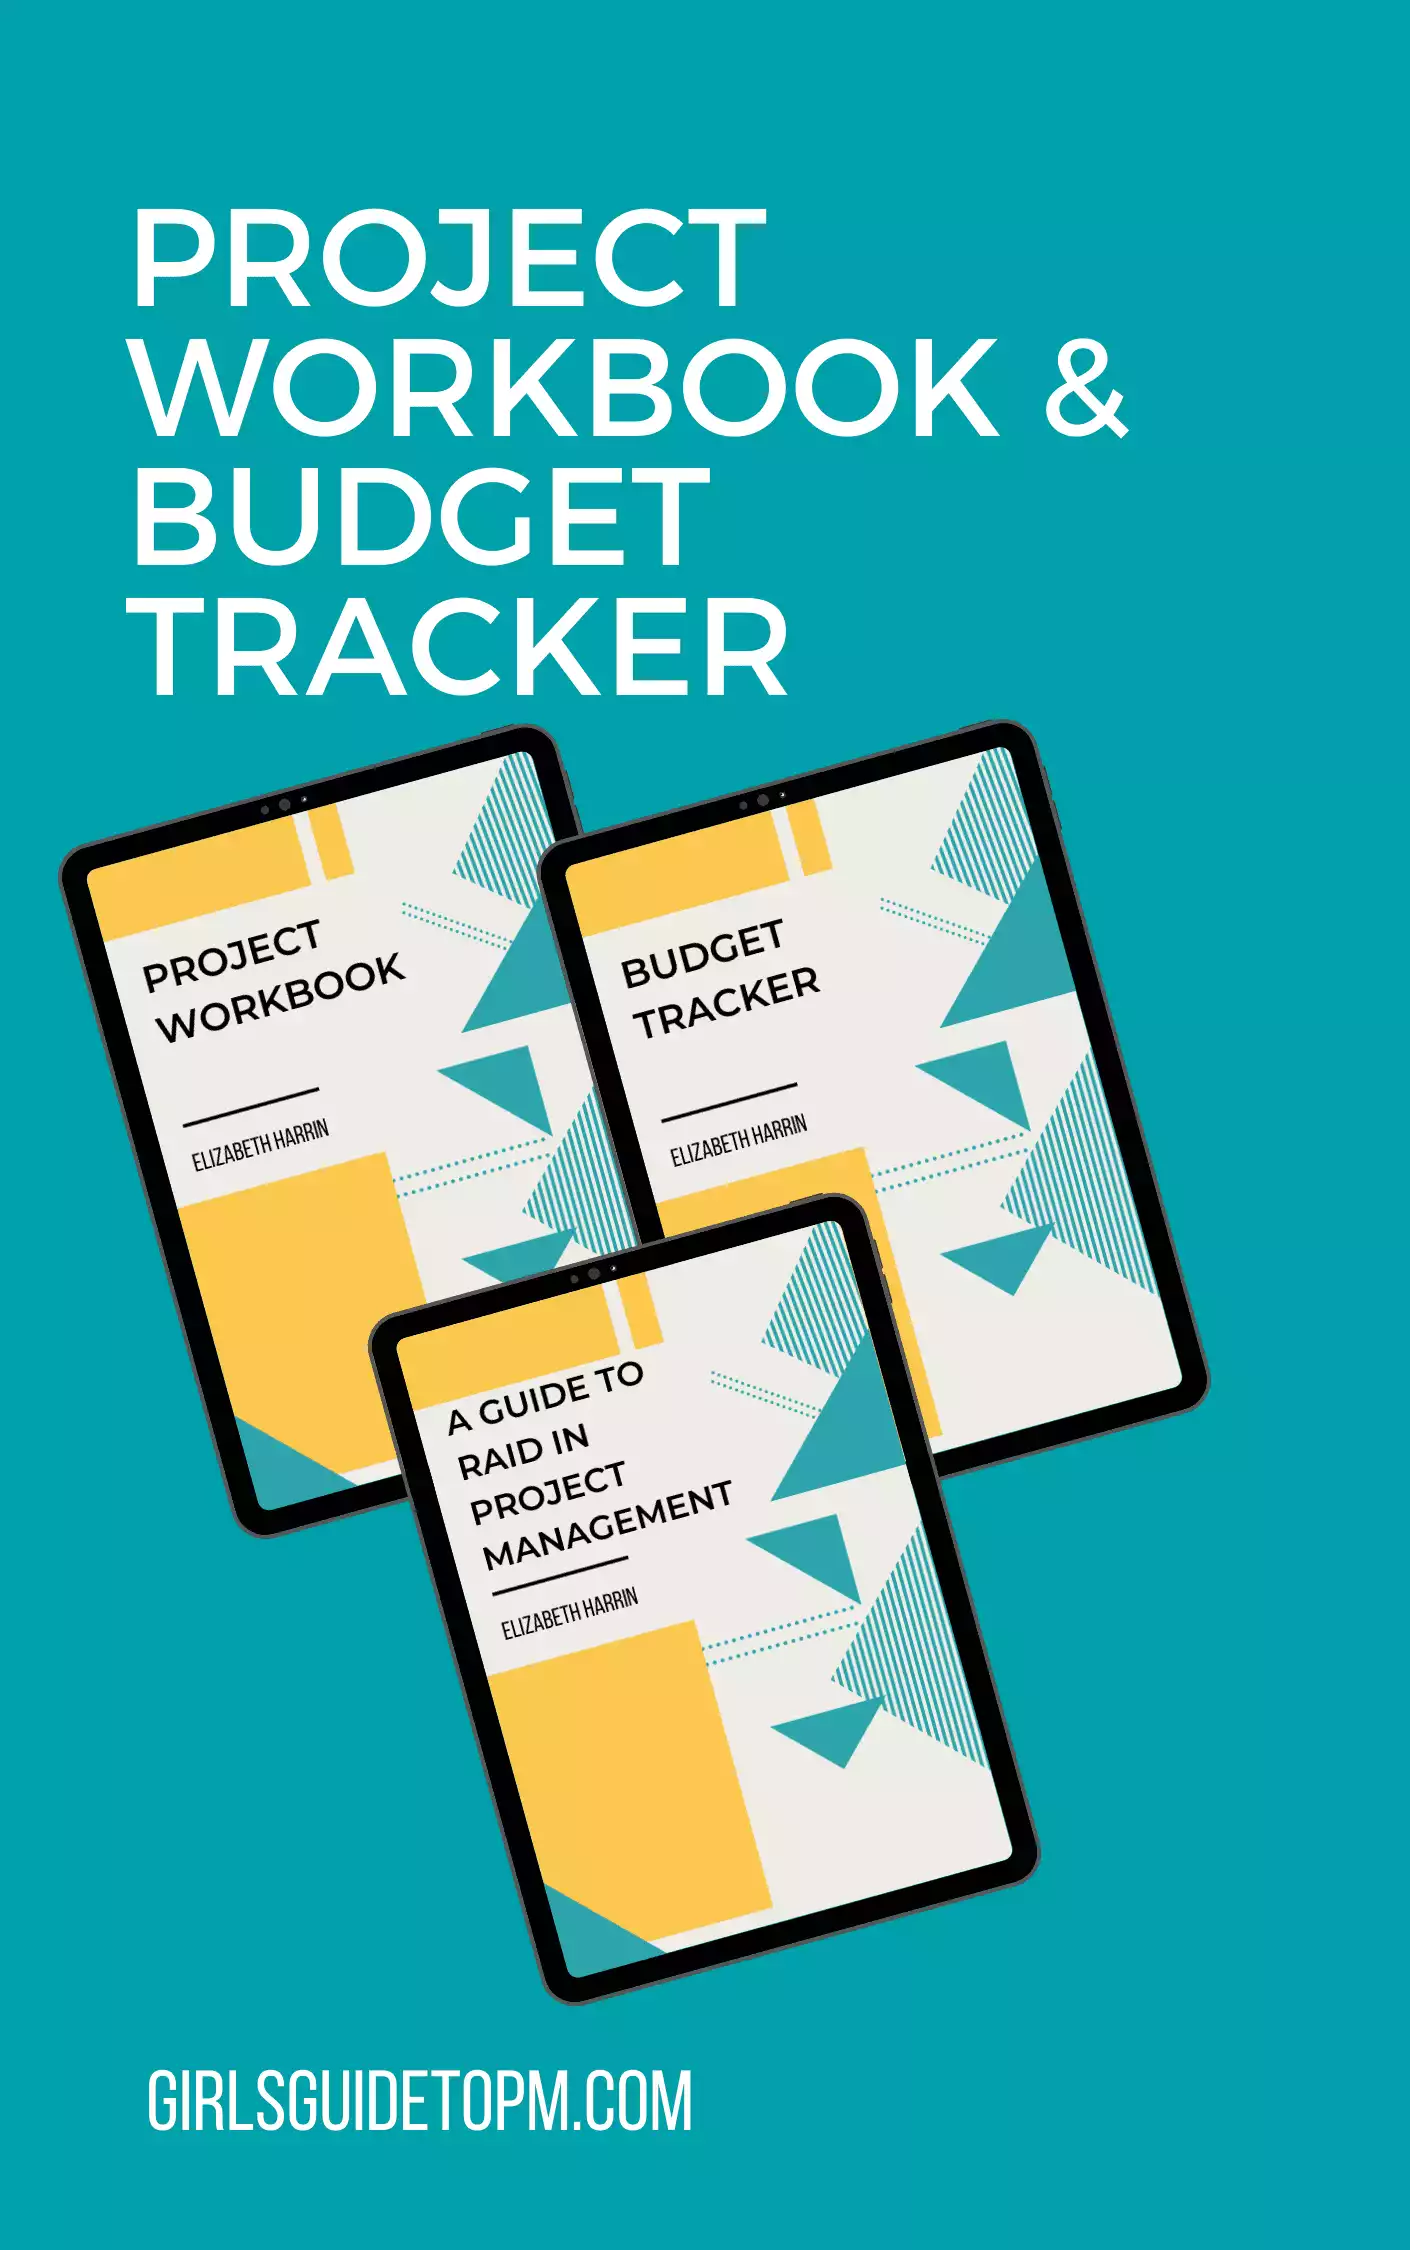 Project Workbook and Budget Tracker